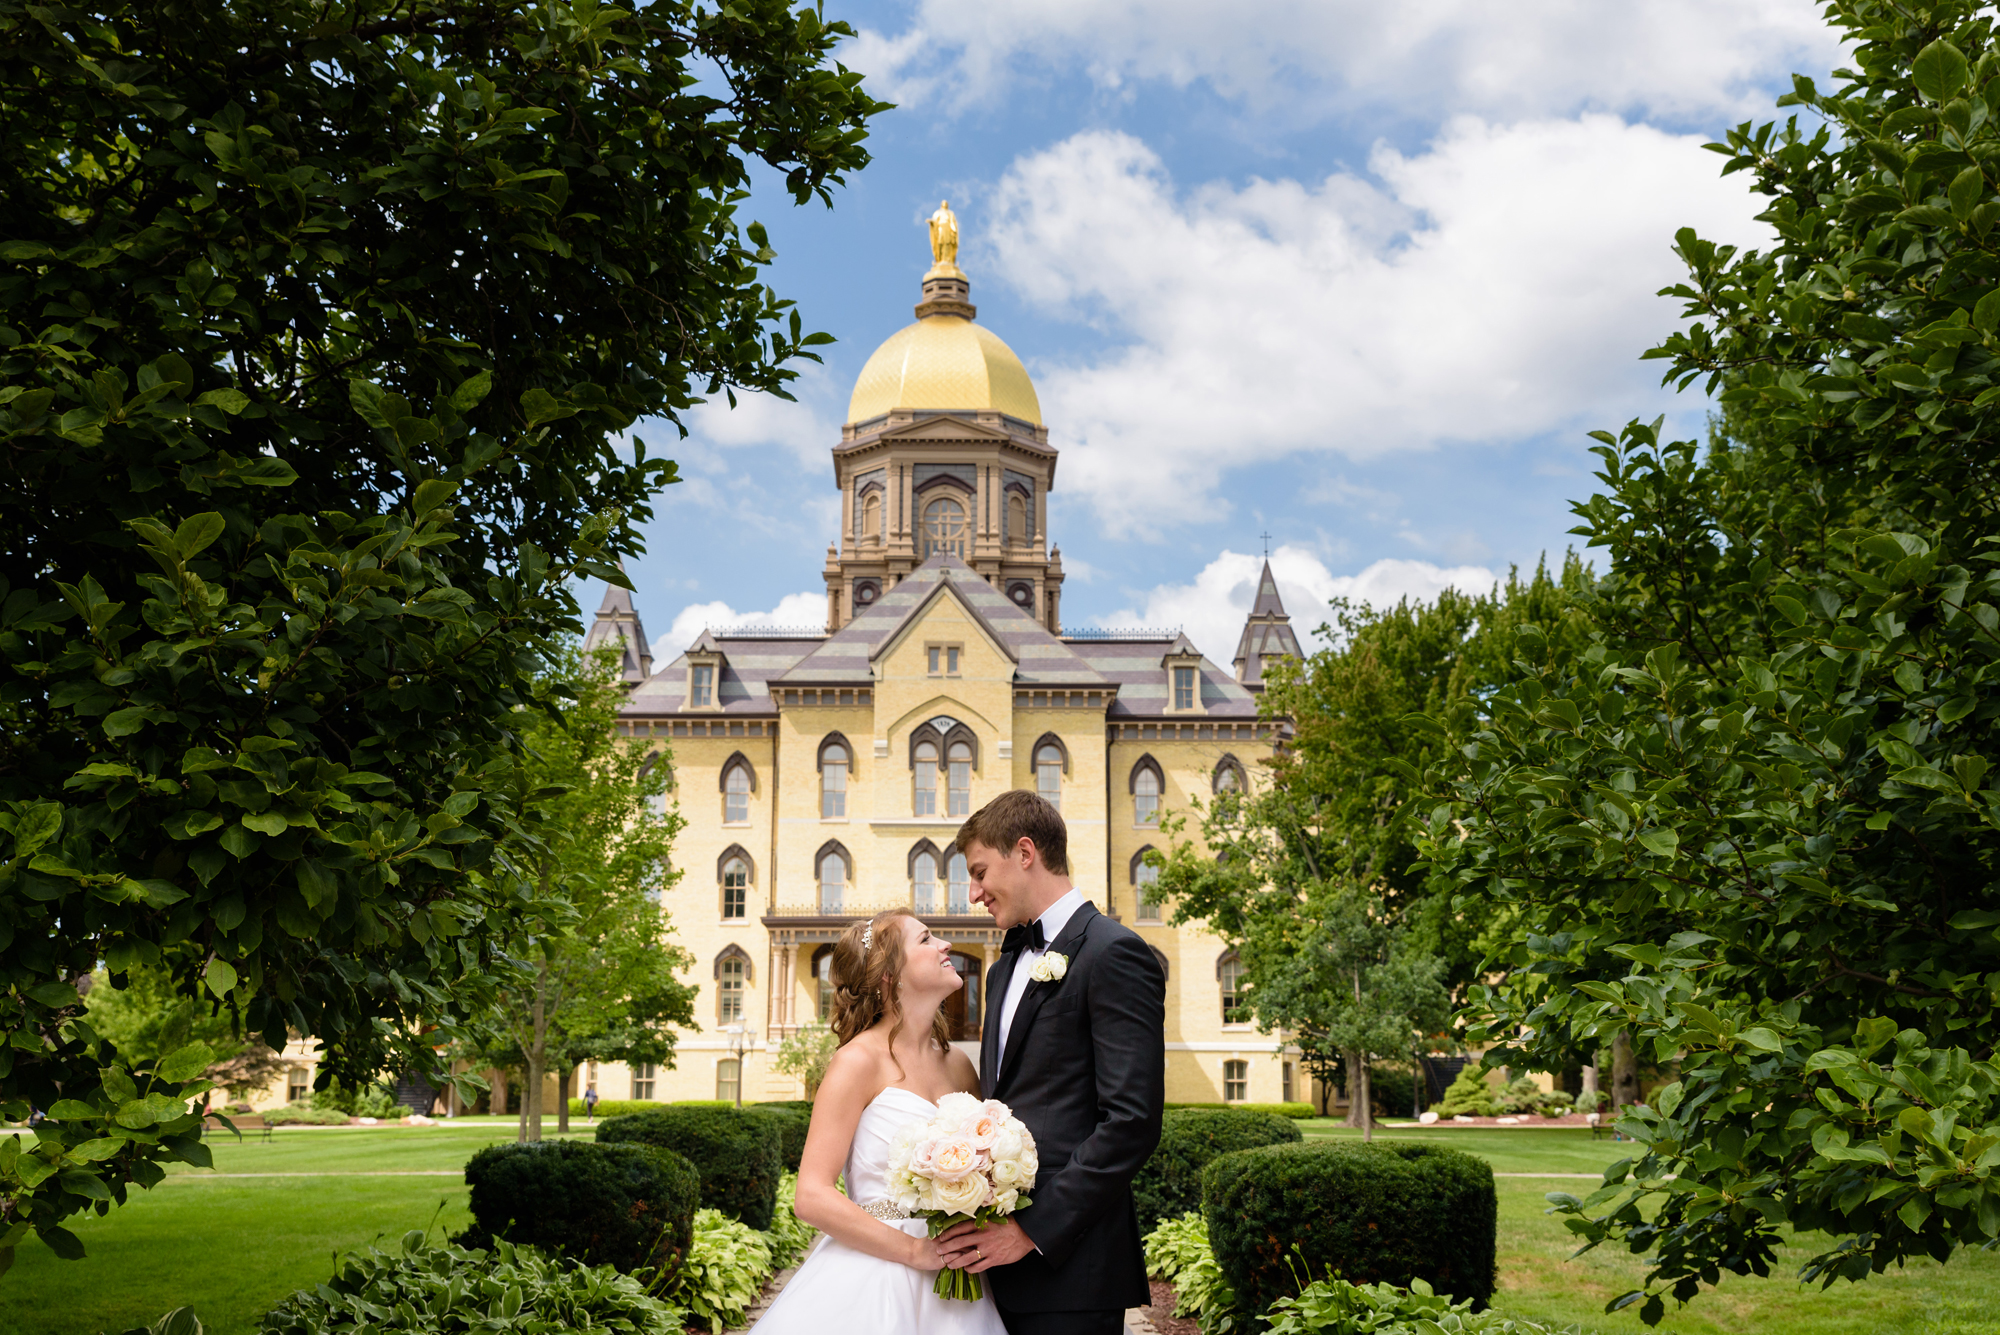 Bride & Groom in front the Golden Dome after their wedding ceremony at the Basilica of the Sacred Heart on the campus of the University of Notre Dame